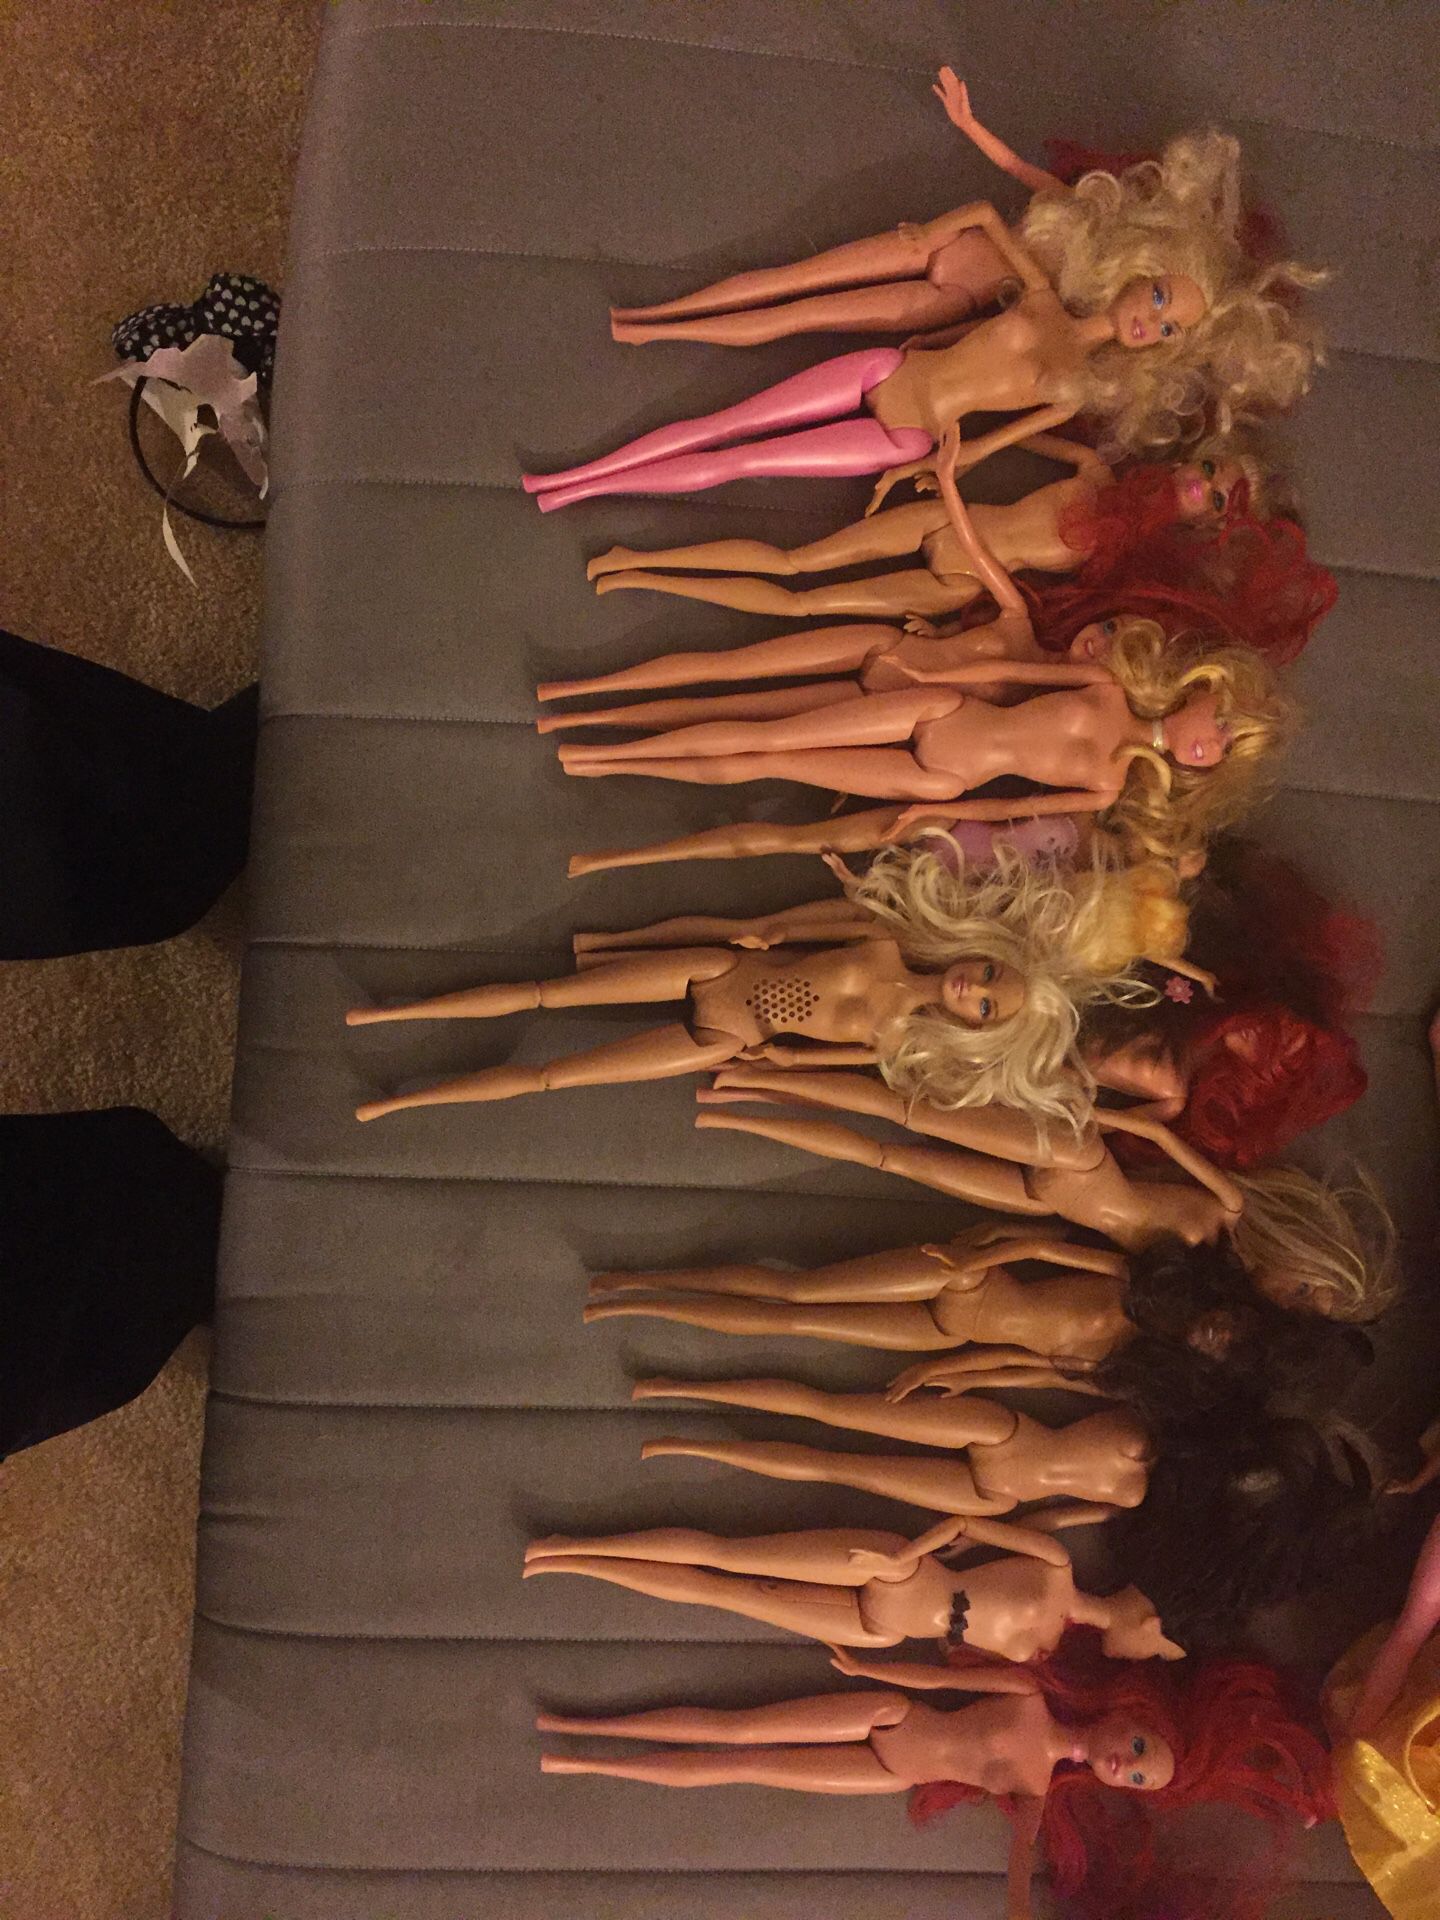 14 Barbie dolls without costumes